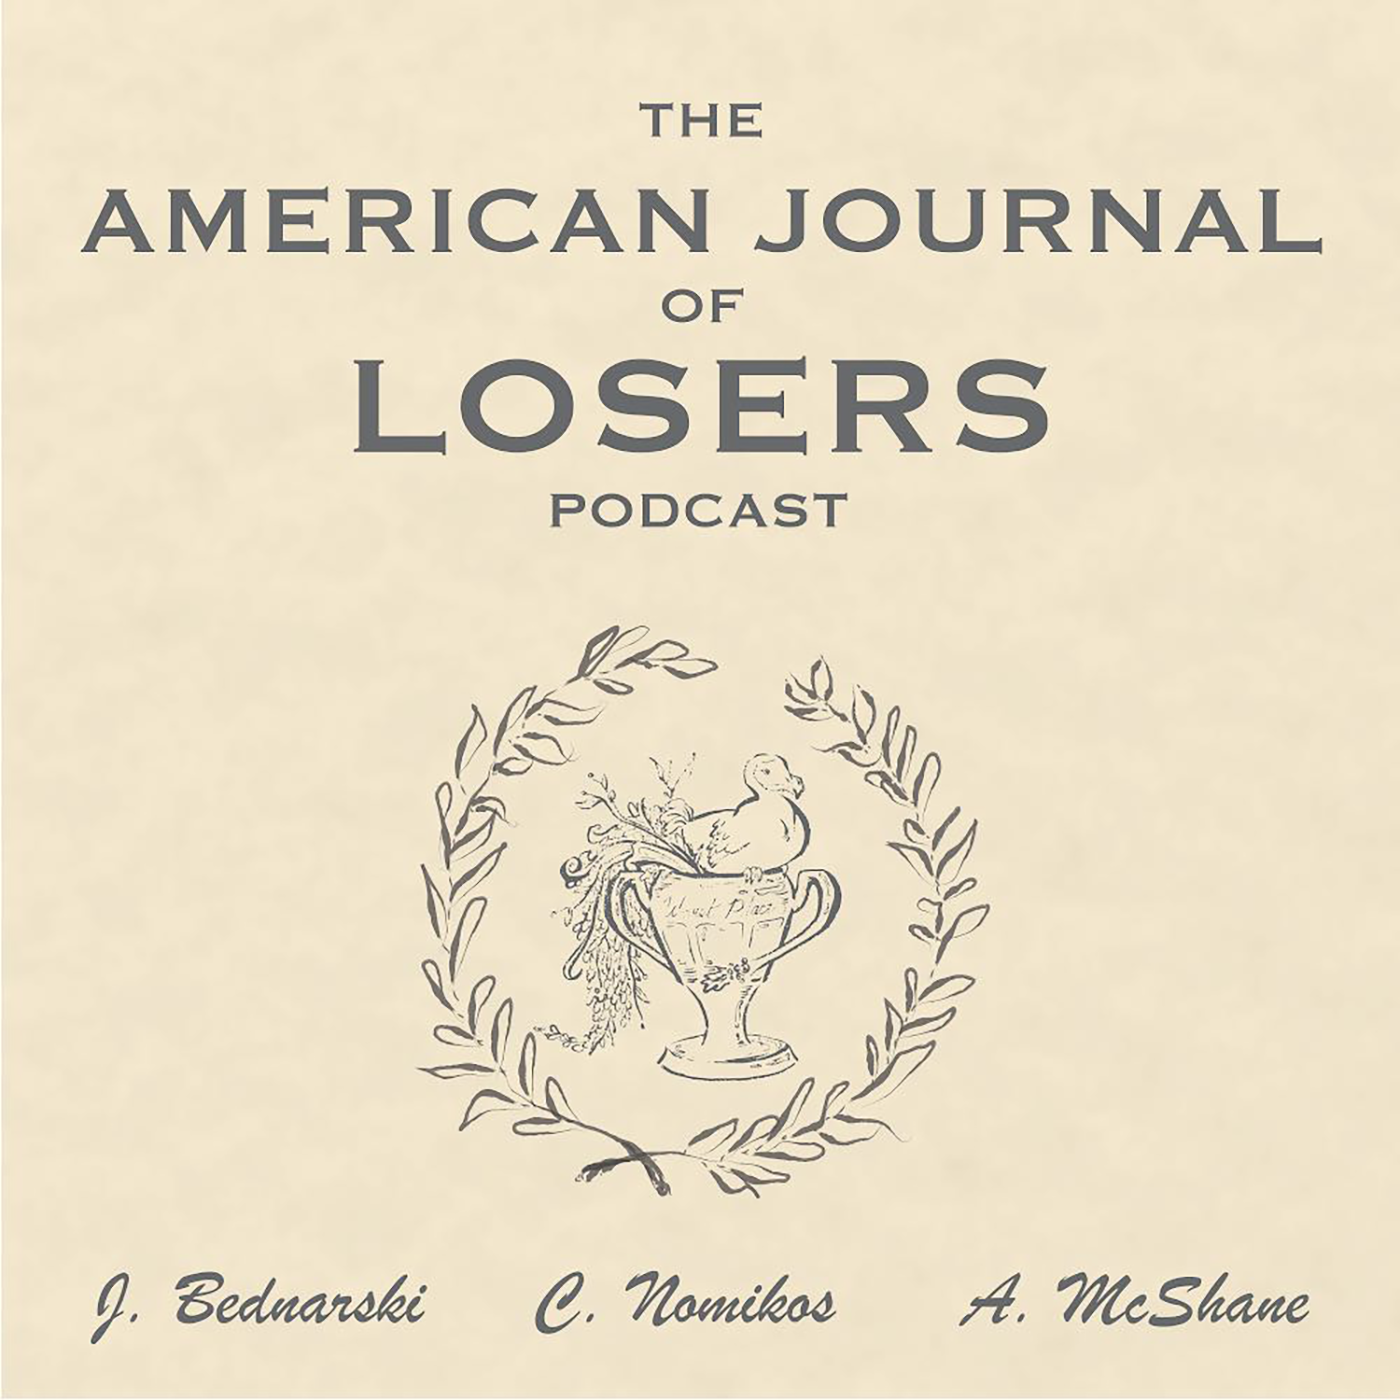 The American Journal of Losers